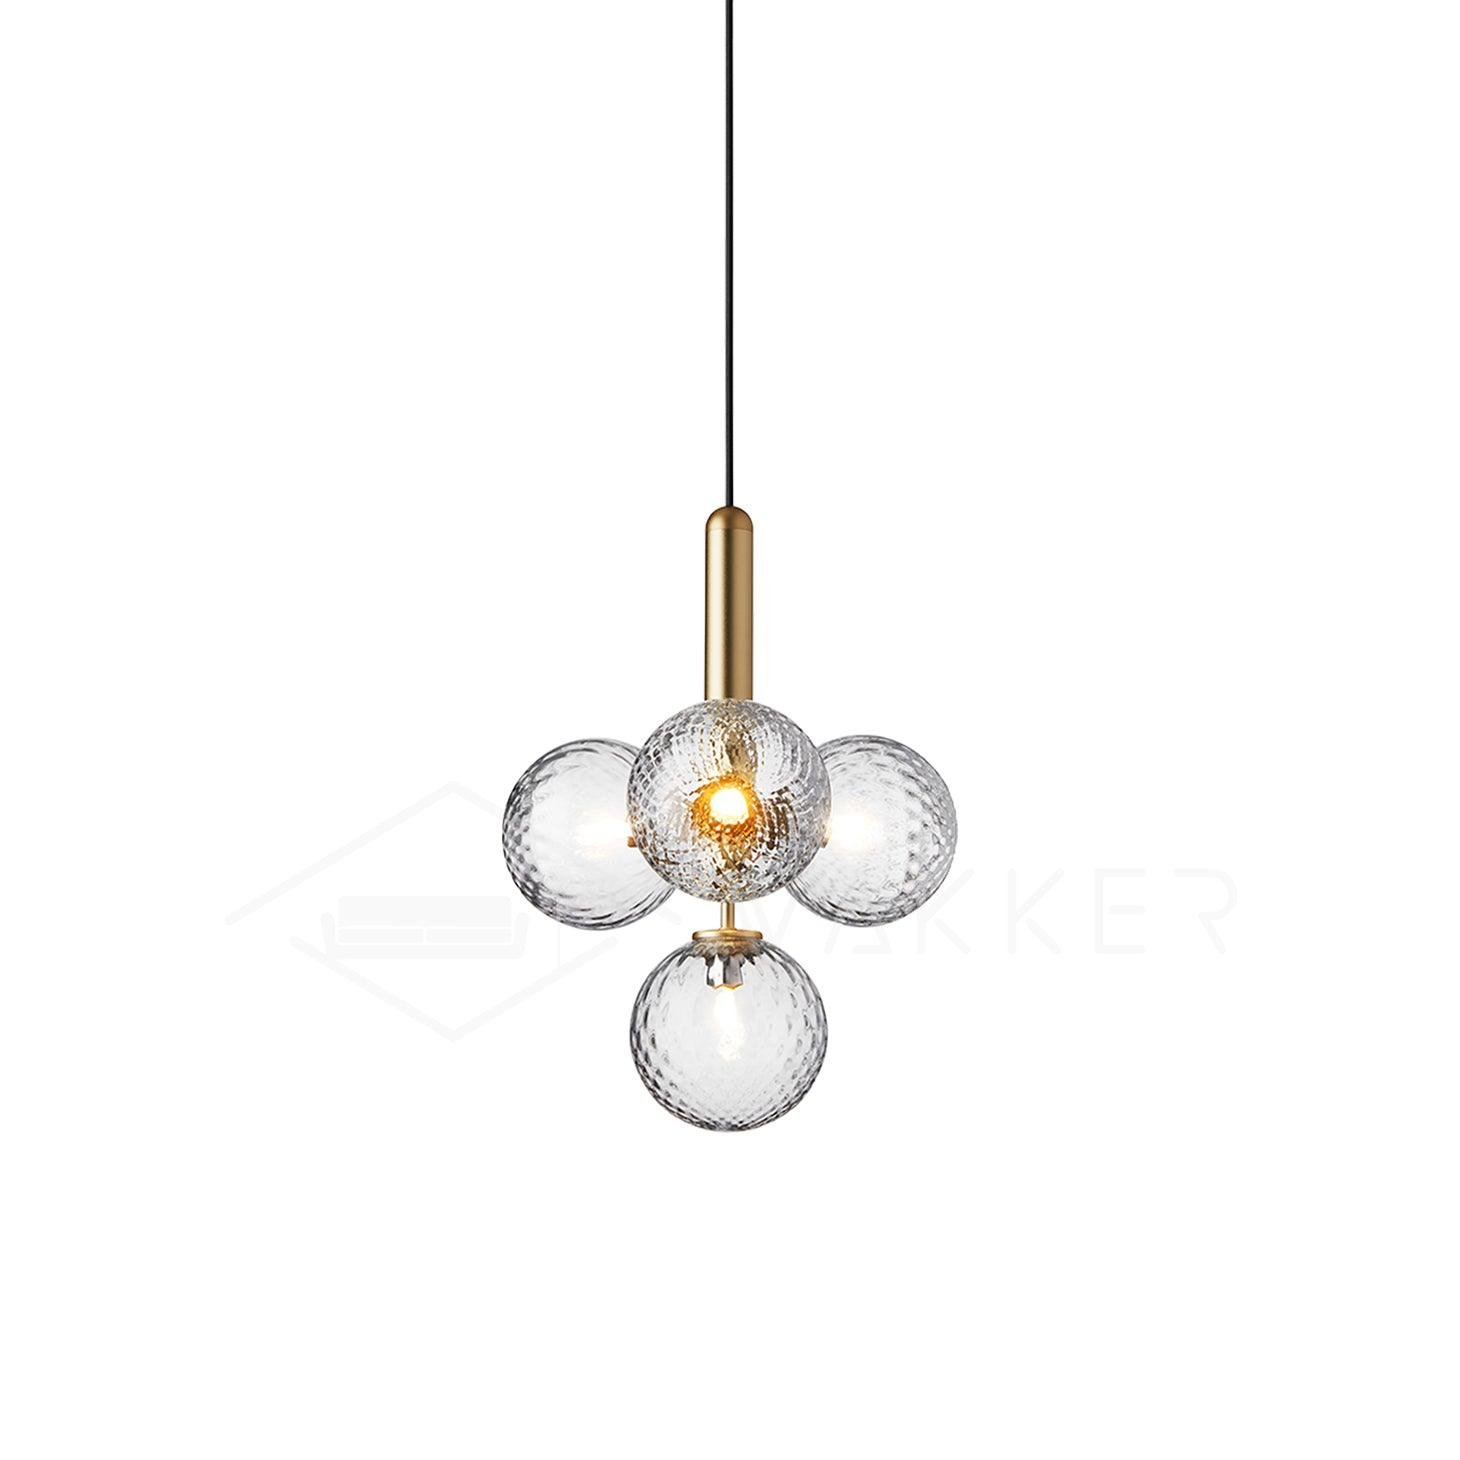 Miira Pendant Light with 4heads, measuring 13.8″ in diameter and 17″ in height (35cm x 43cm), in a stylish gold color with a clear design.